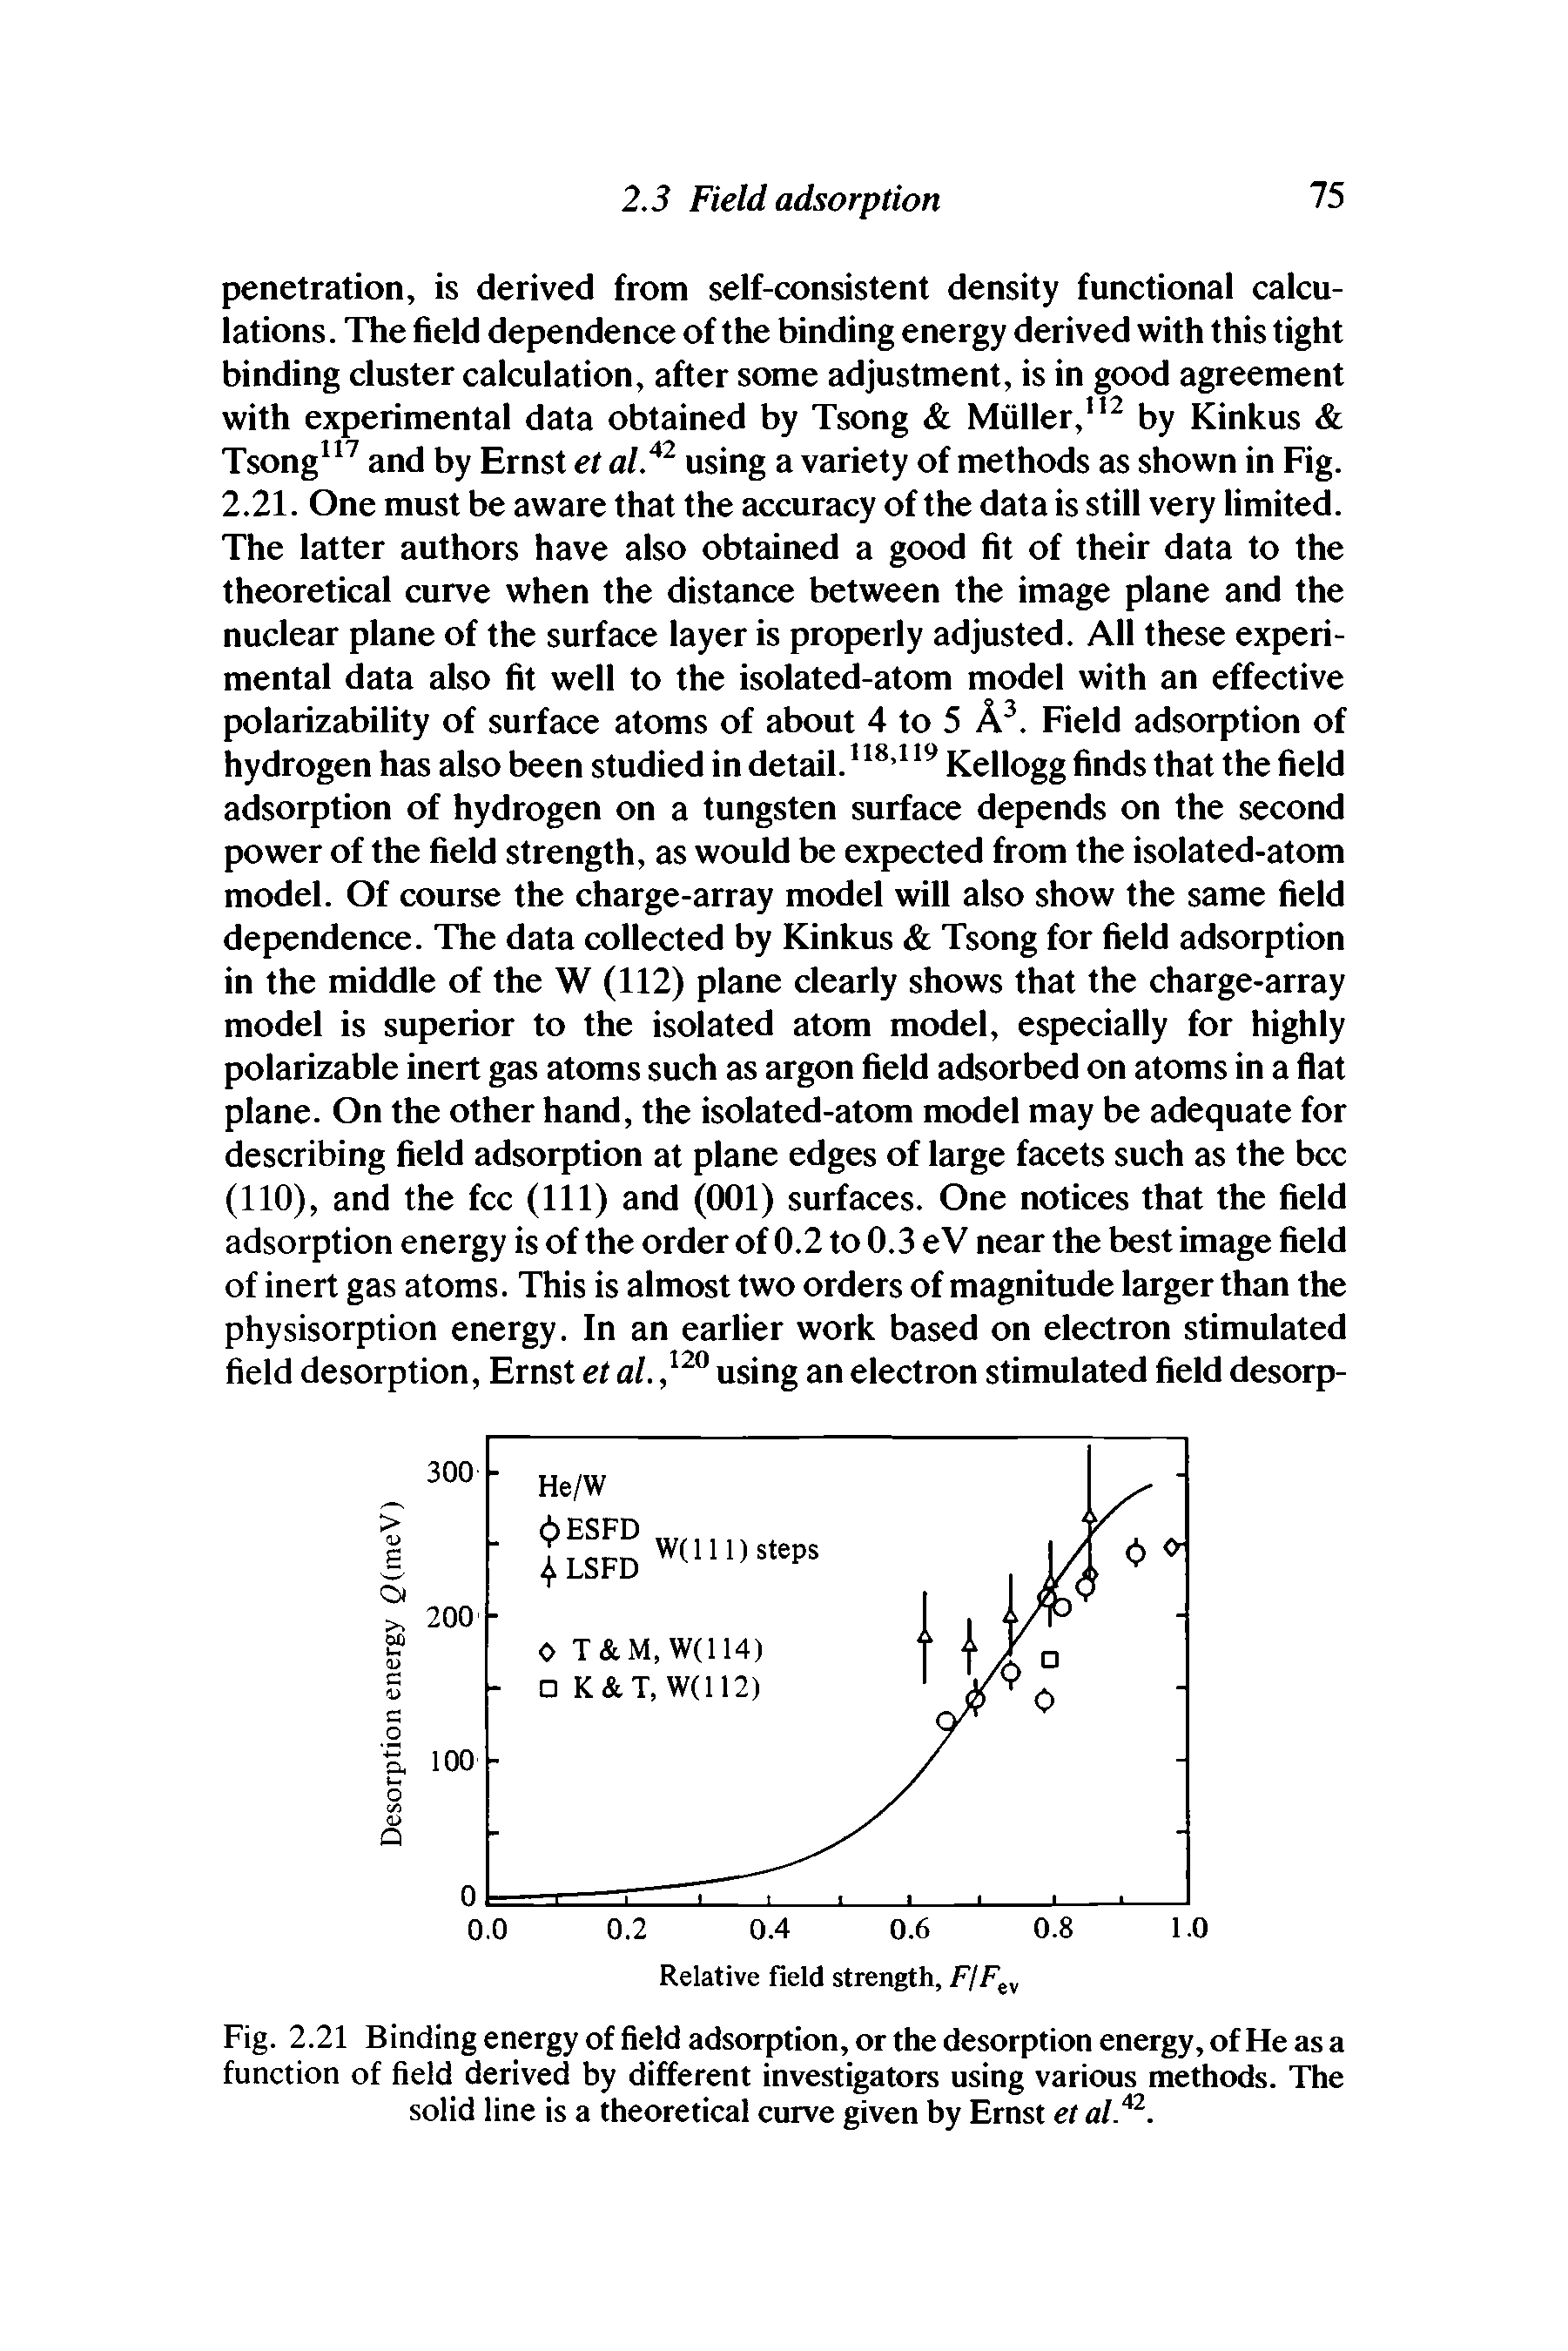 Fig. 2.21 Binding energy of field adsorption, or the desorption energy, of He as a function of field derived by different investigators using various methods. The solid line is a theoretical curve given by Ernst et al.42.